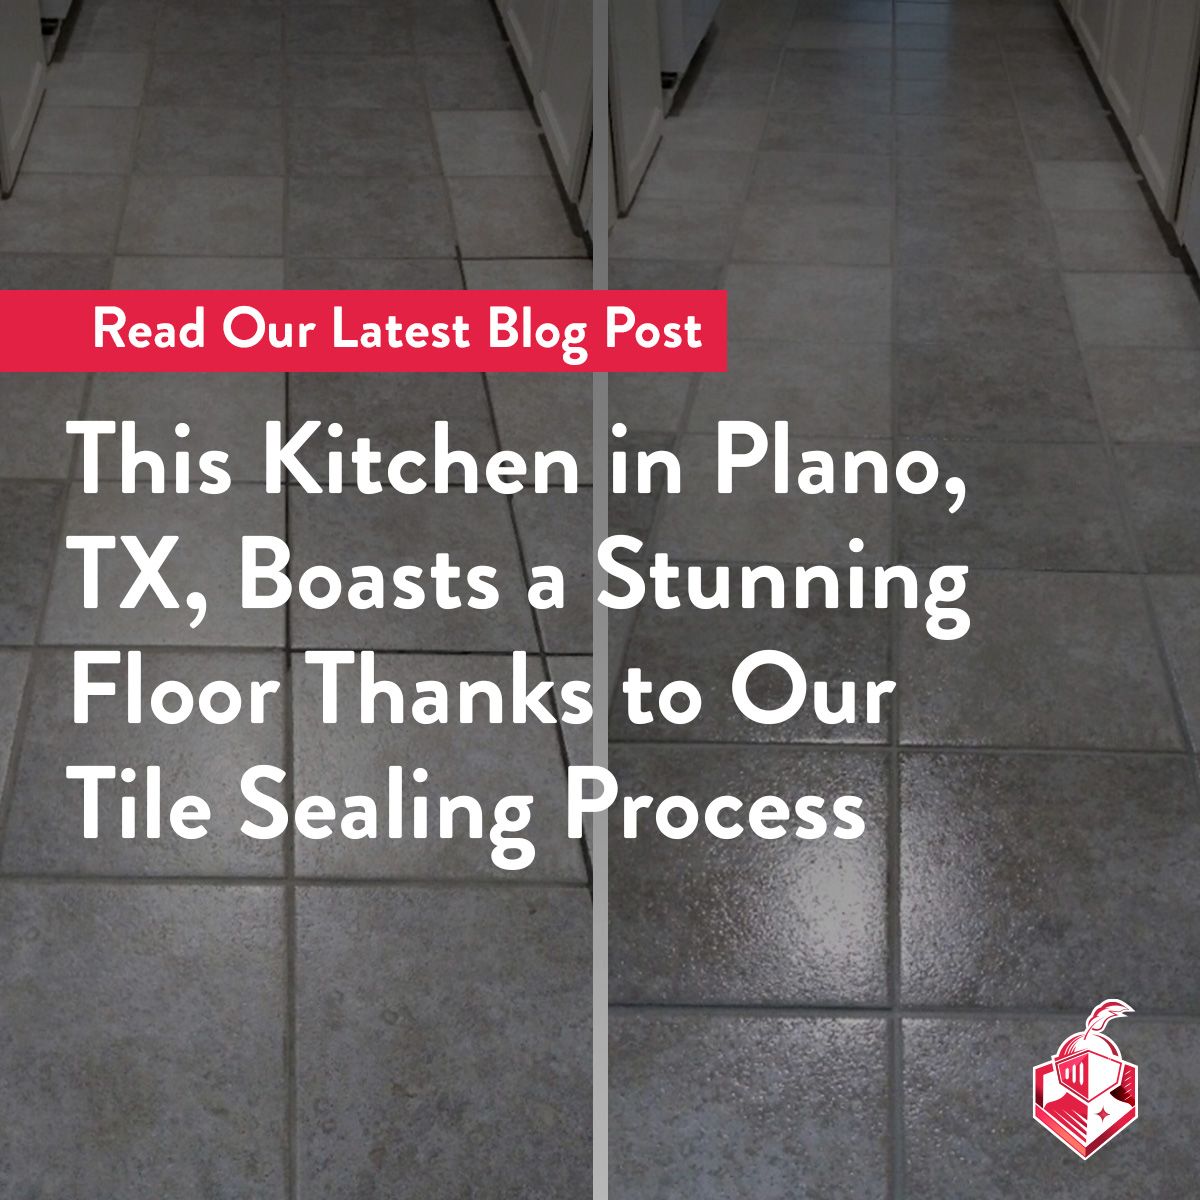 This Kitchen in Plano, TX, Boasts a Stunning Floor Thanks to Our Tile Sealing Process